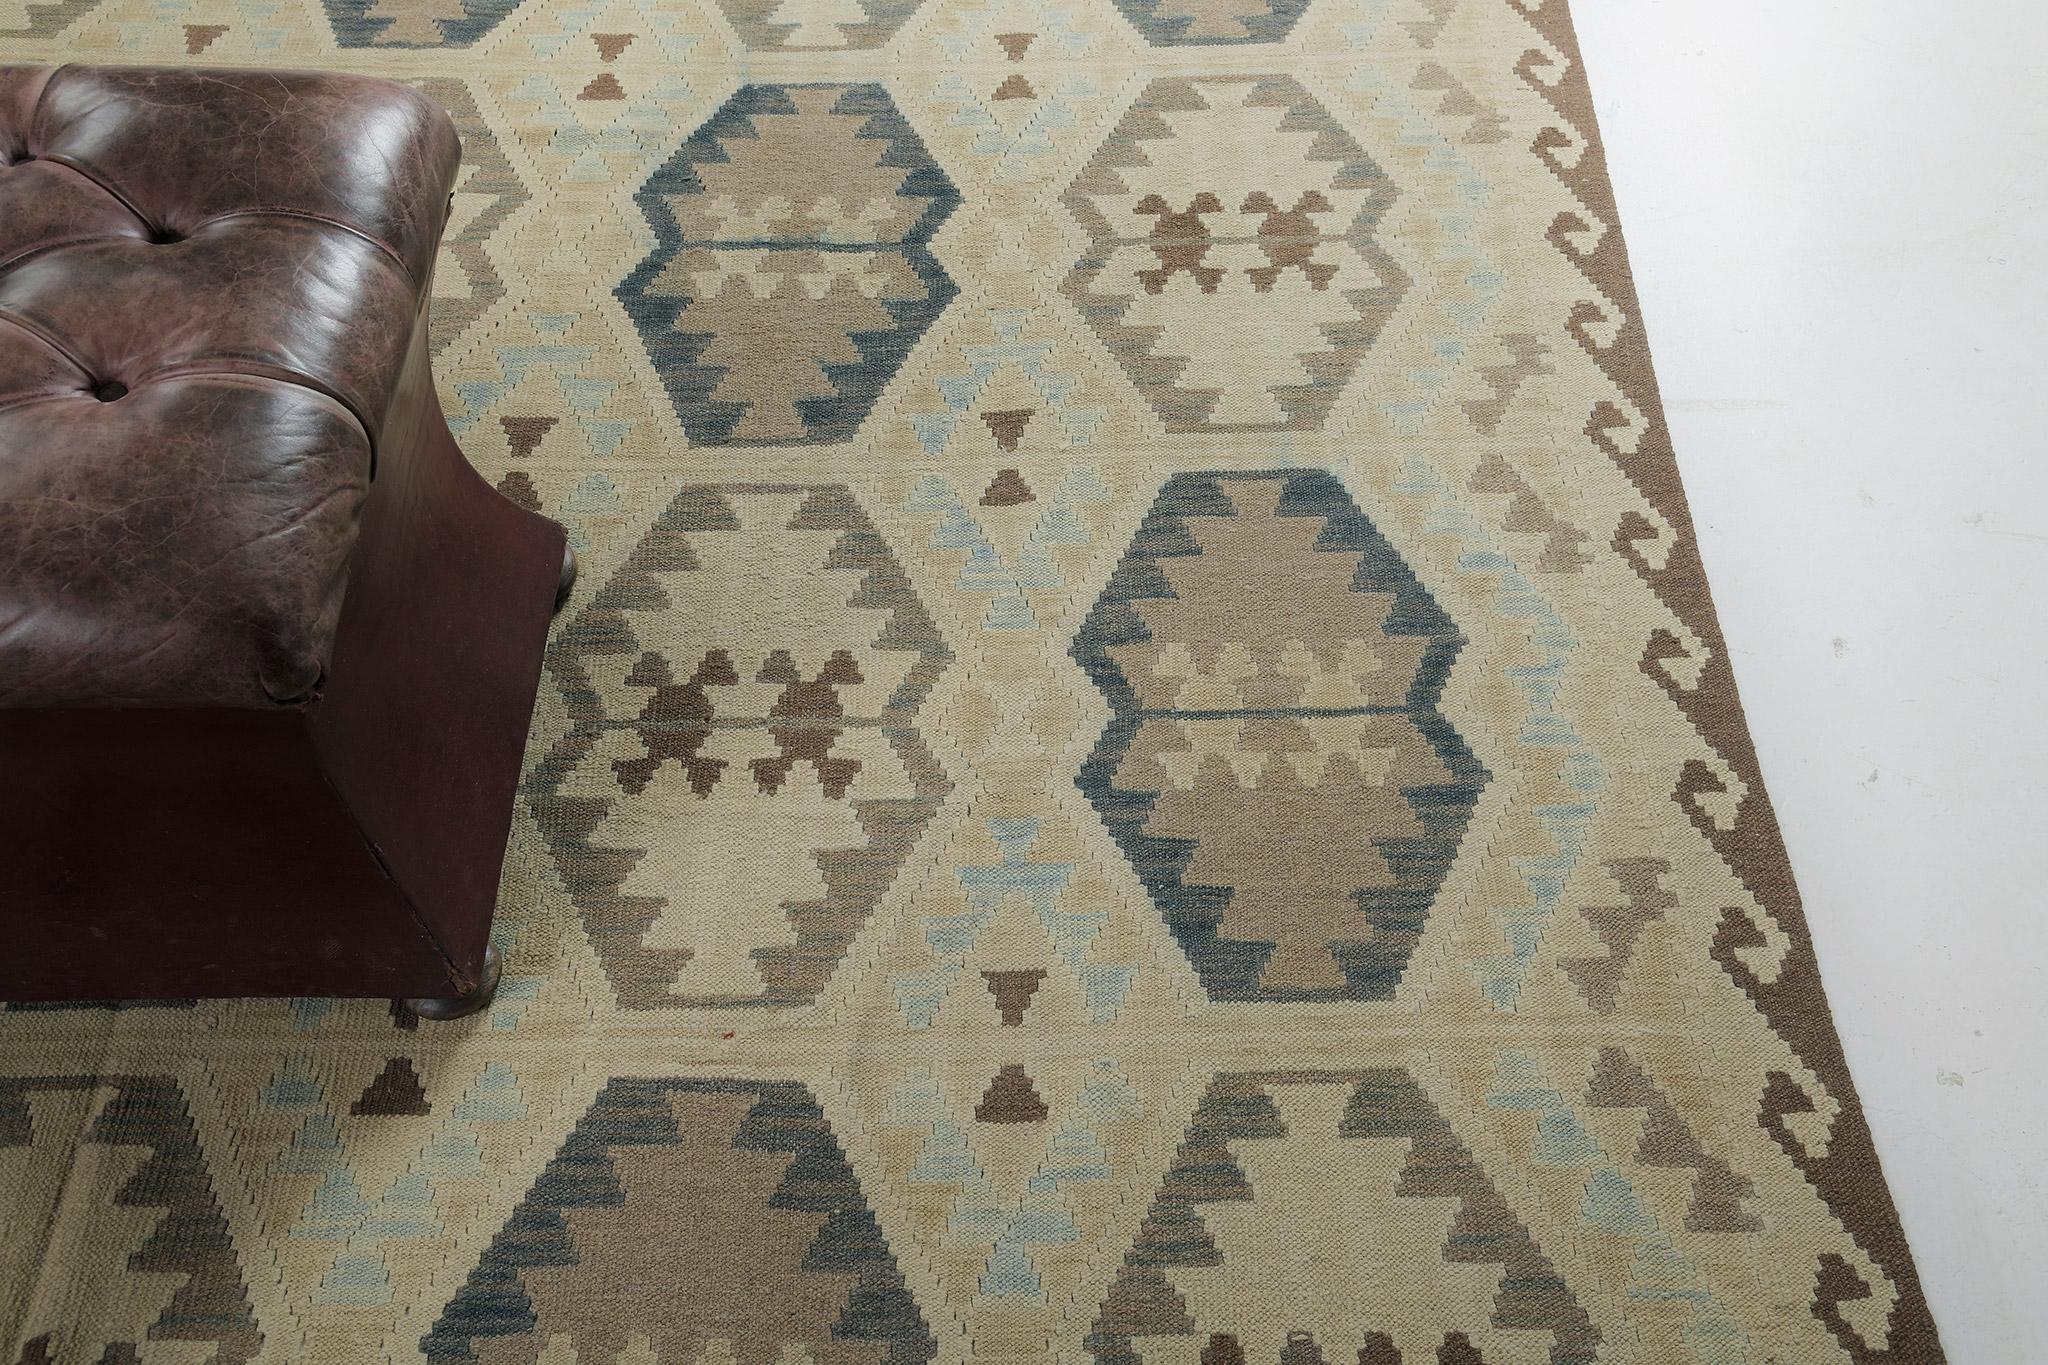 A combination of neutral to cool tones is featured in this Tribal flat-weave kilim in vintage style. With its simplicity, it is easy to match every interior you want to decorate. A perfect centerpiece that is versatile and flexible in every